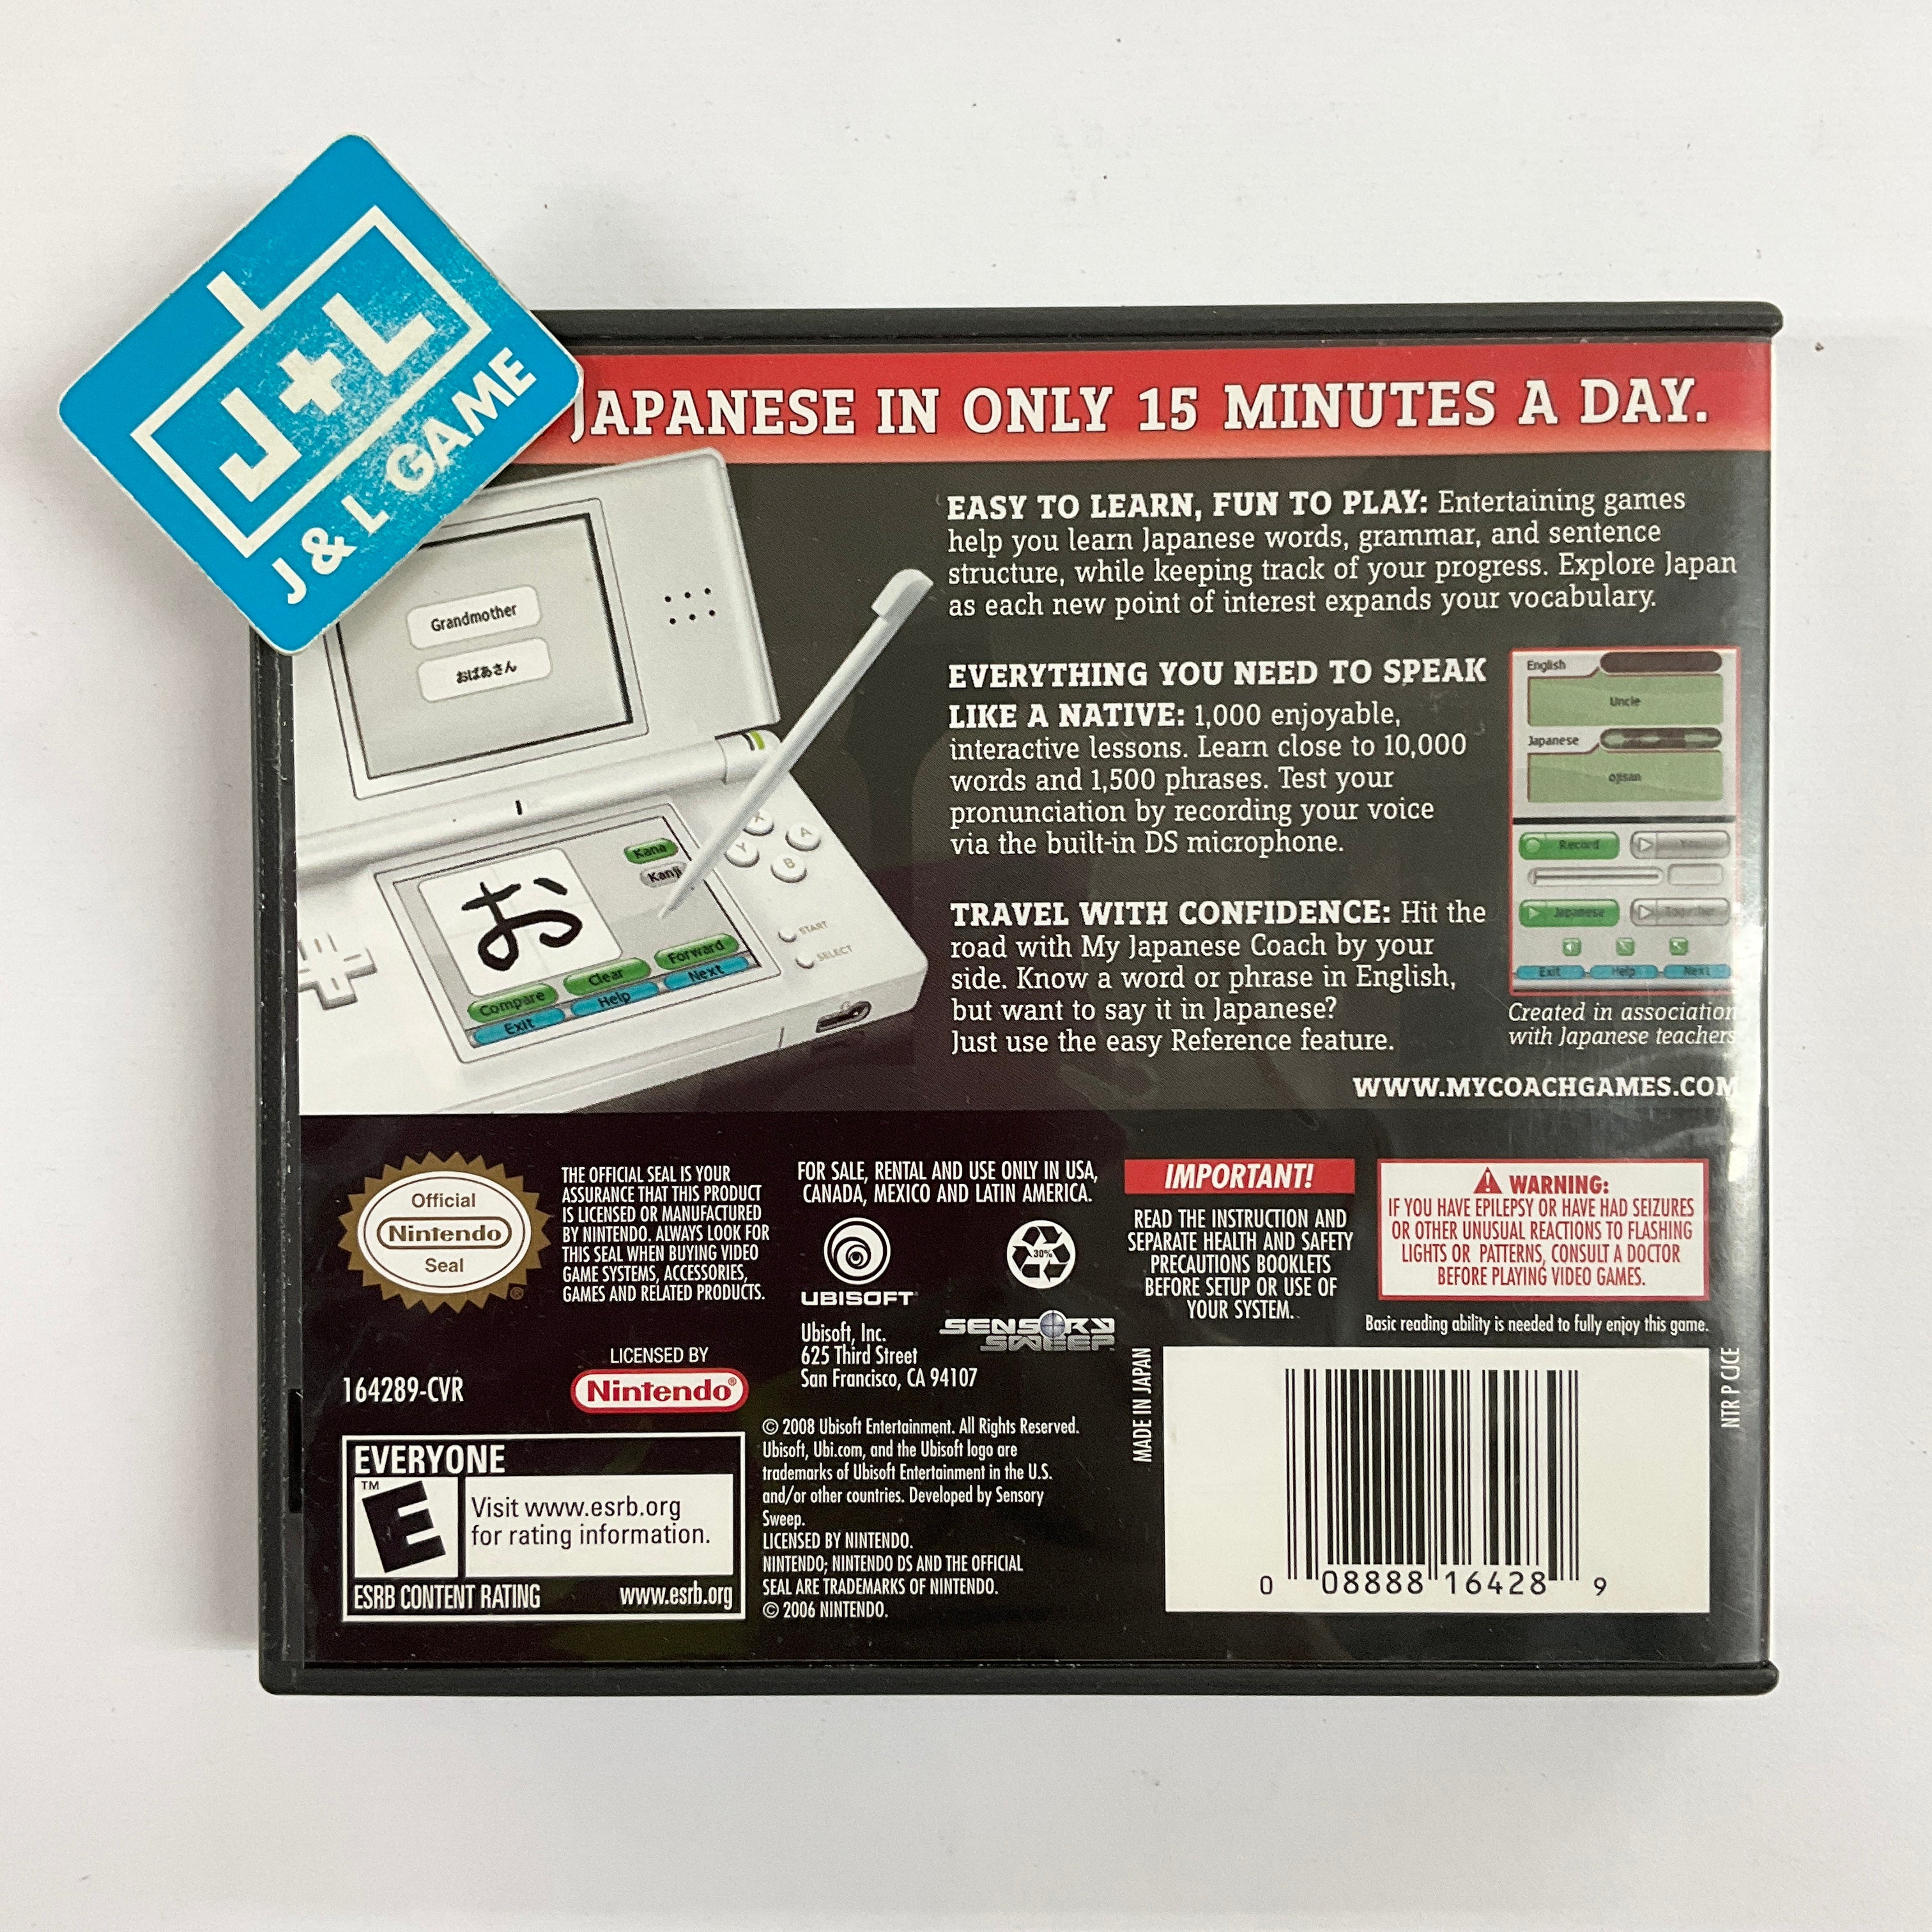 My Japanese Coach - (NDS) Nintendo DS [Pre-Owned] Video Games Ubisoft   